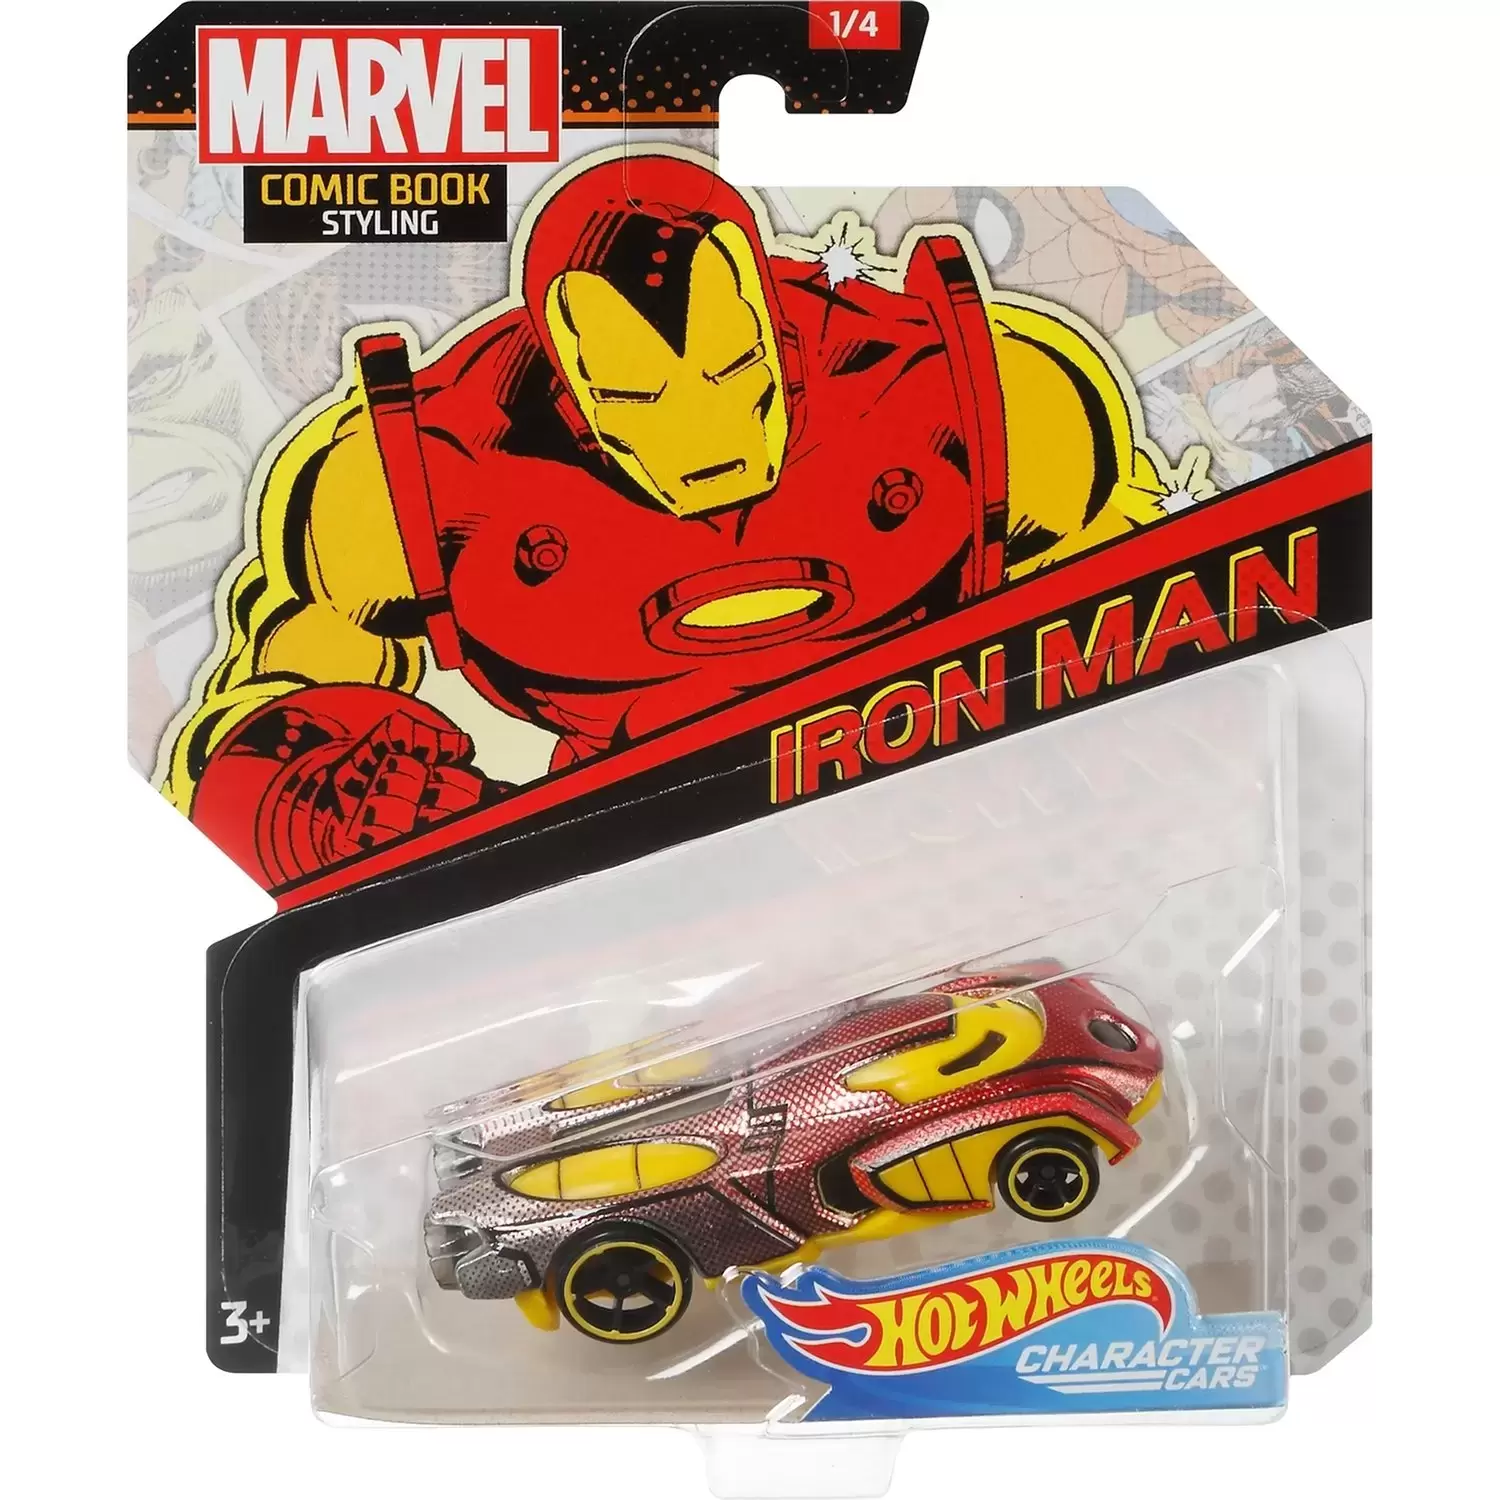 Marvel Character Cars - Marvel Comic Book Styling - Iron Man